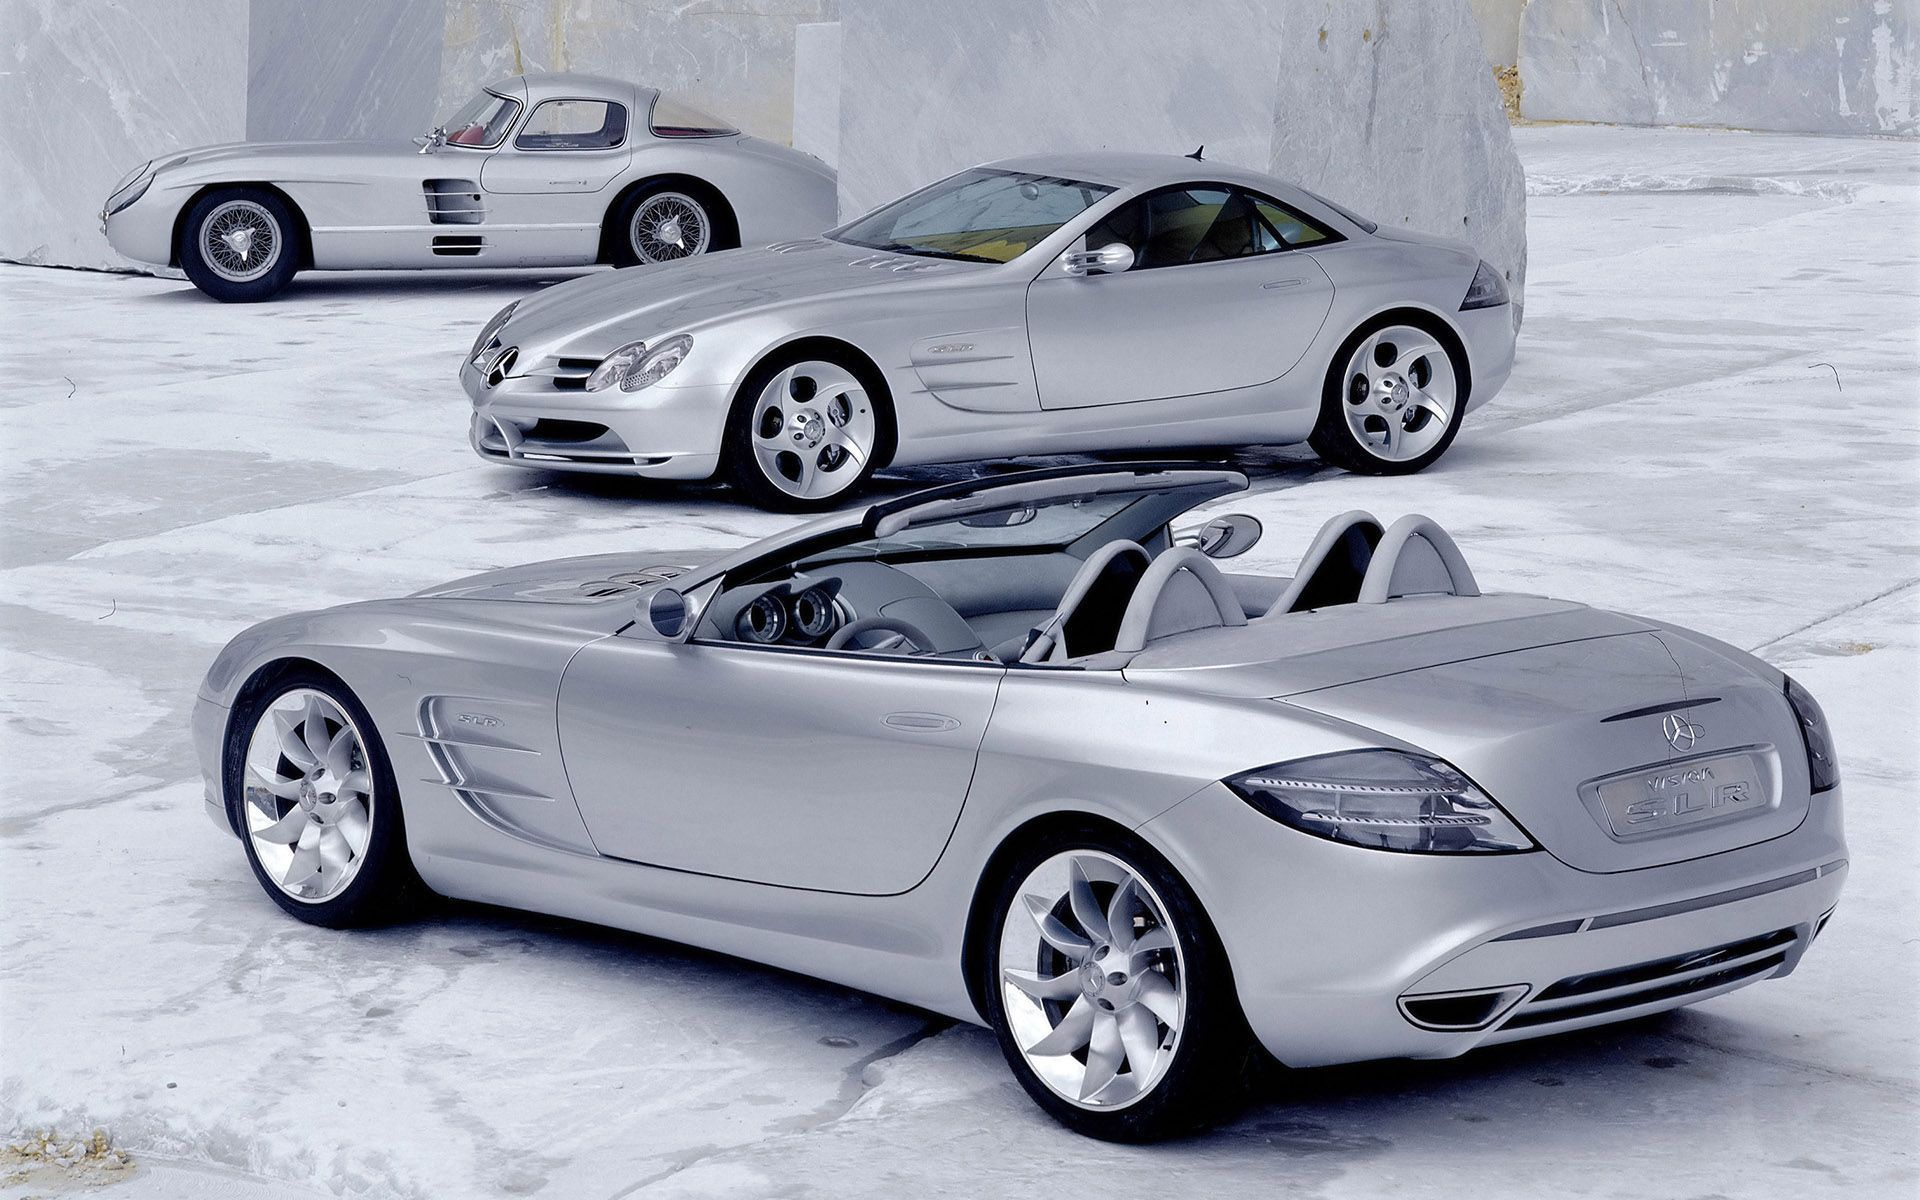 HD Cars Wallpapers HD 1920x1200 www.HQPictures.tk Col1 - Photo 50 ...